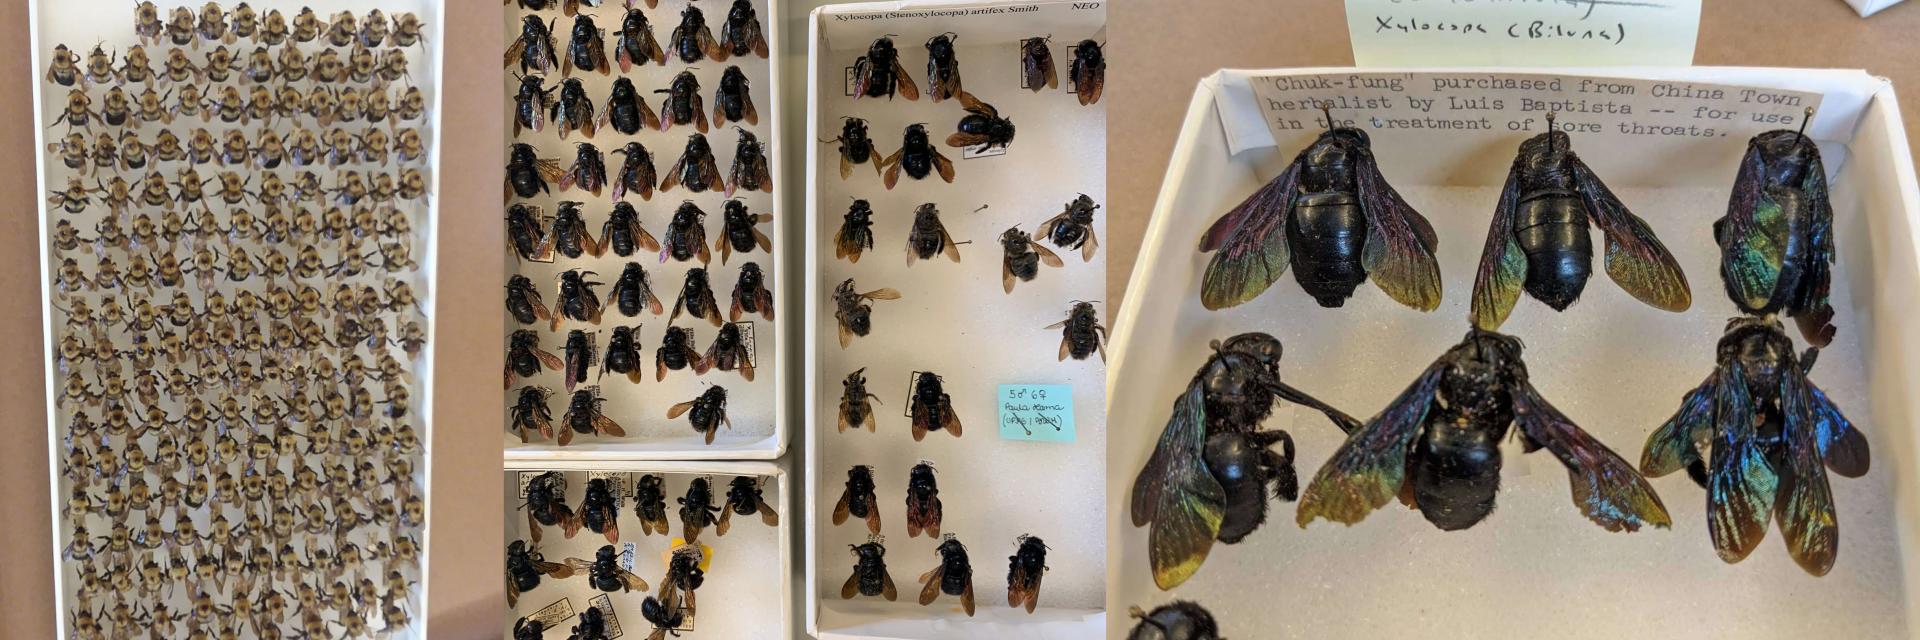 Bees from the collection in trays